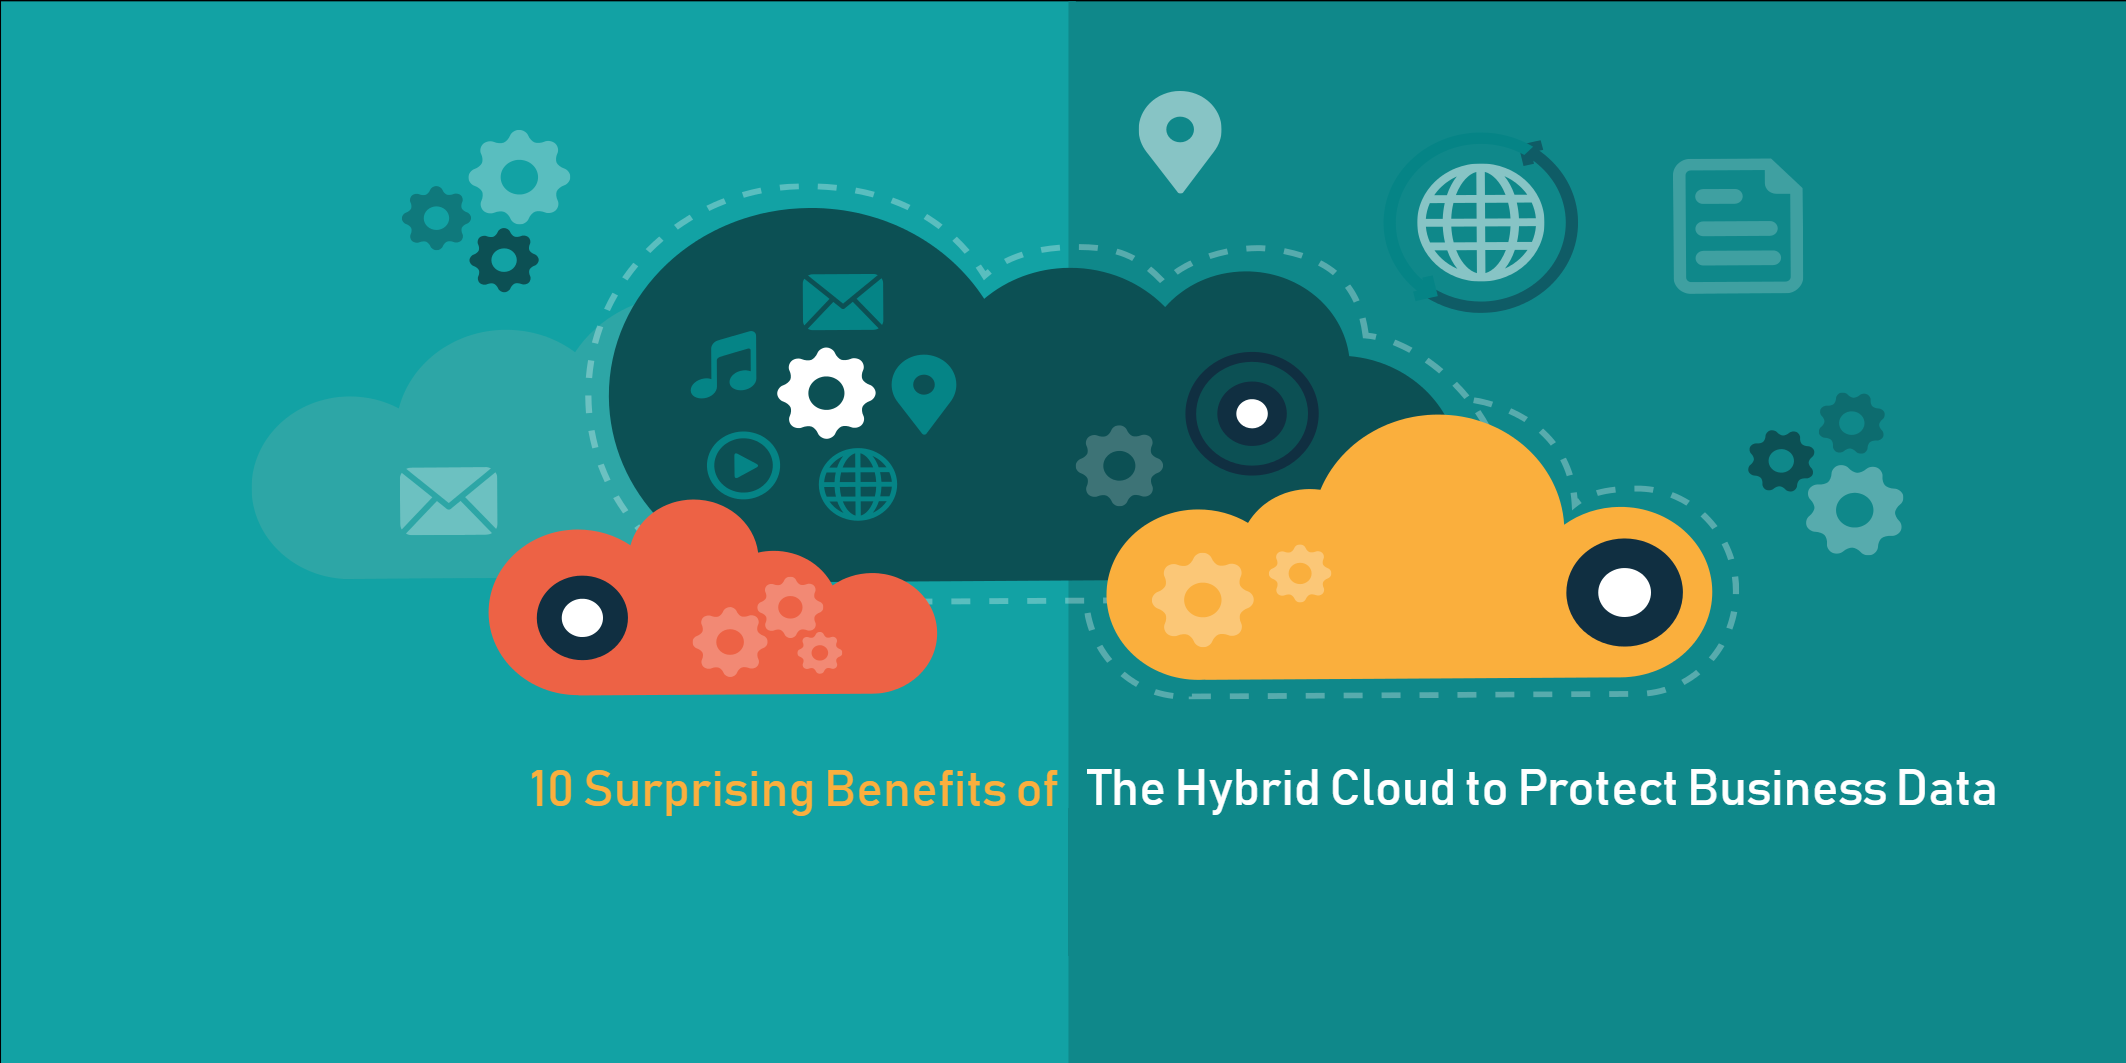 10-surprising-benefits-of-the-hybrid-cloud-to-protect-business-data